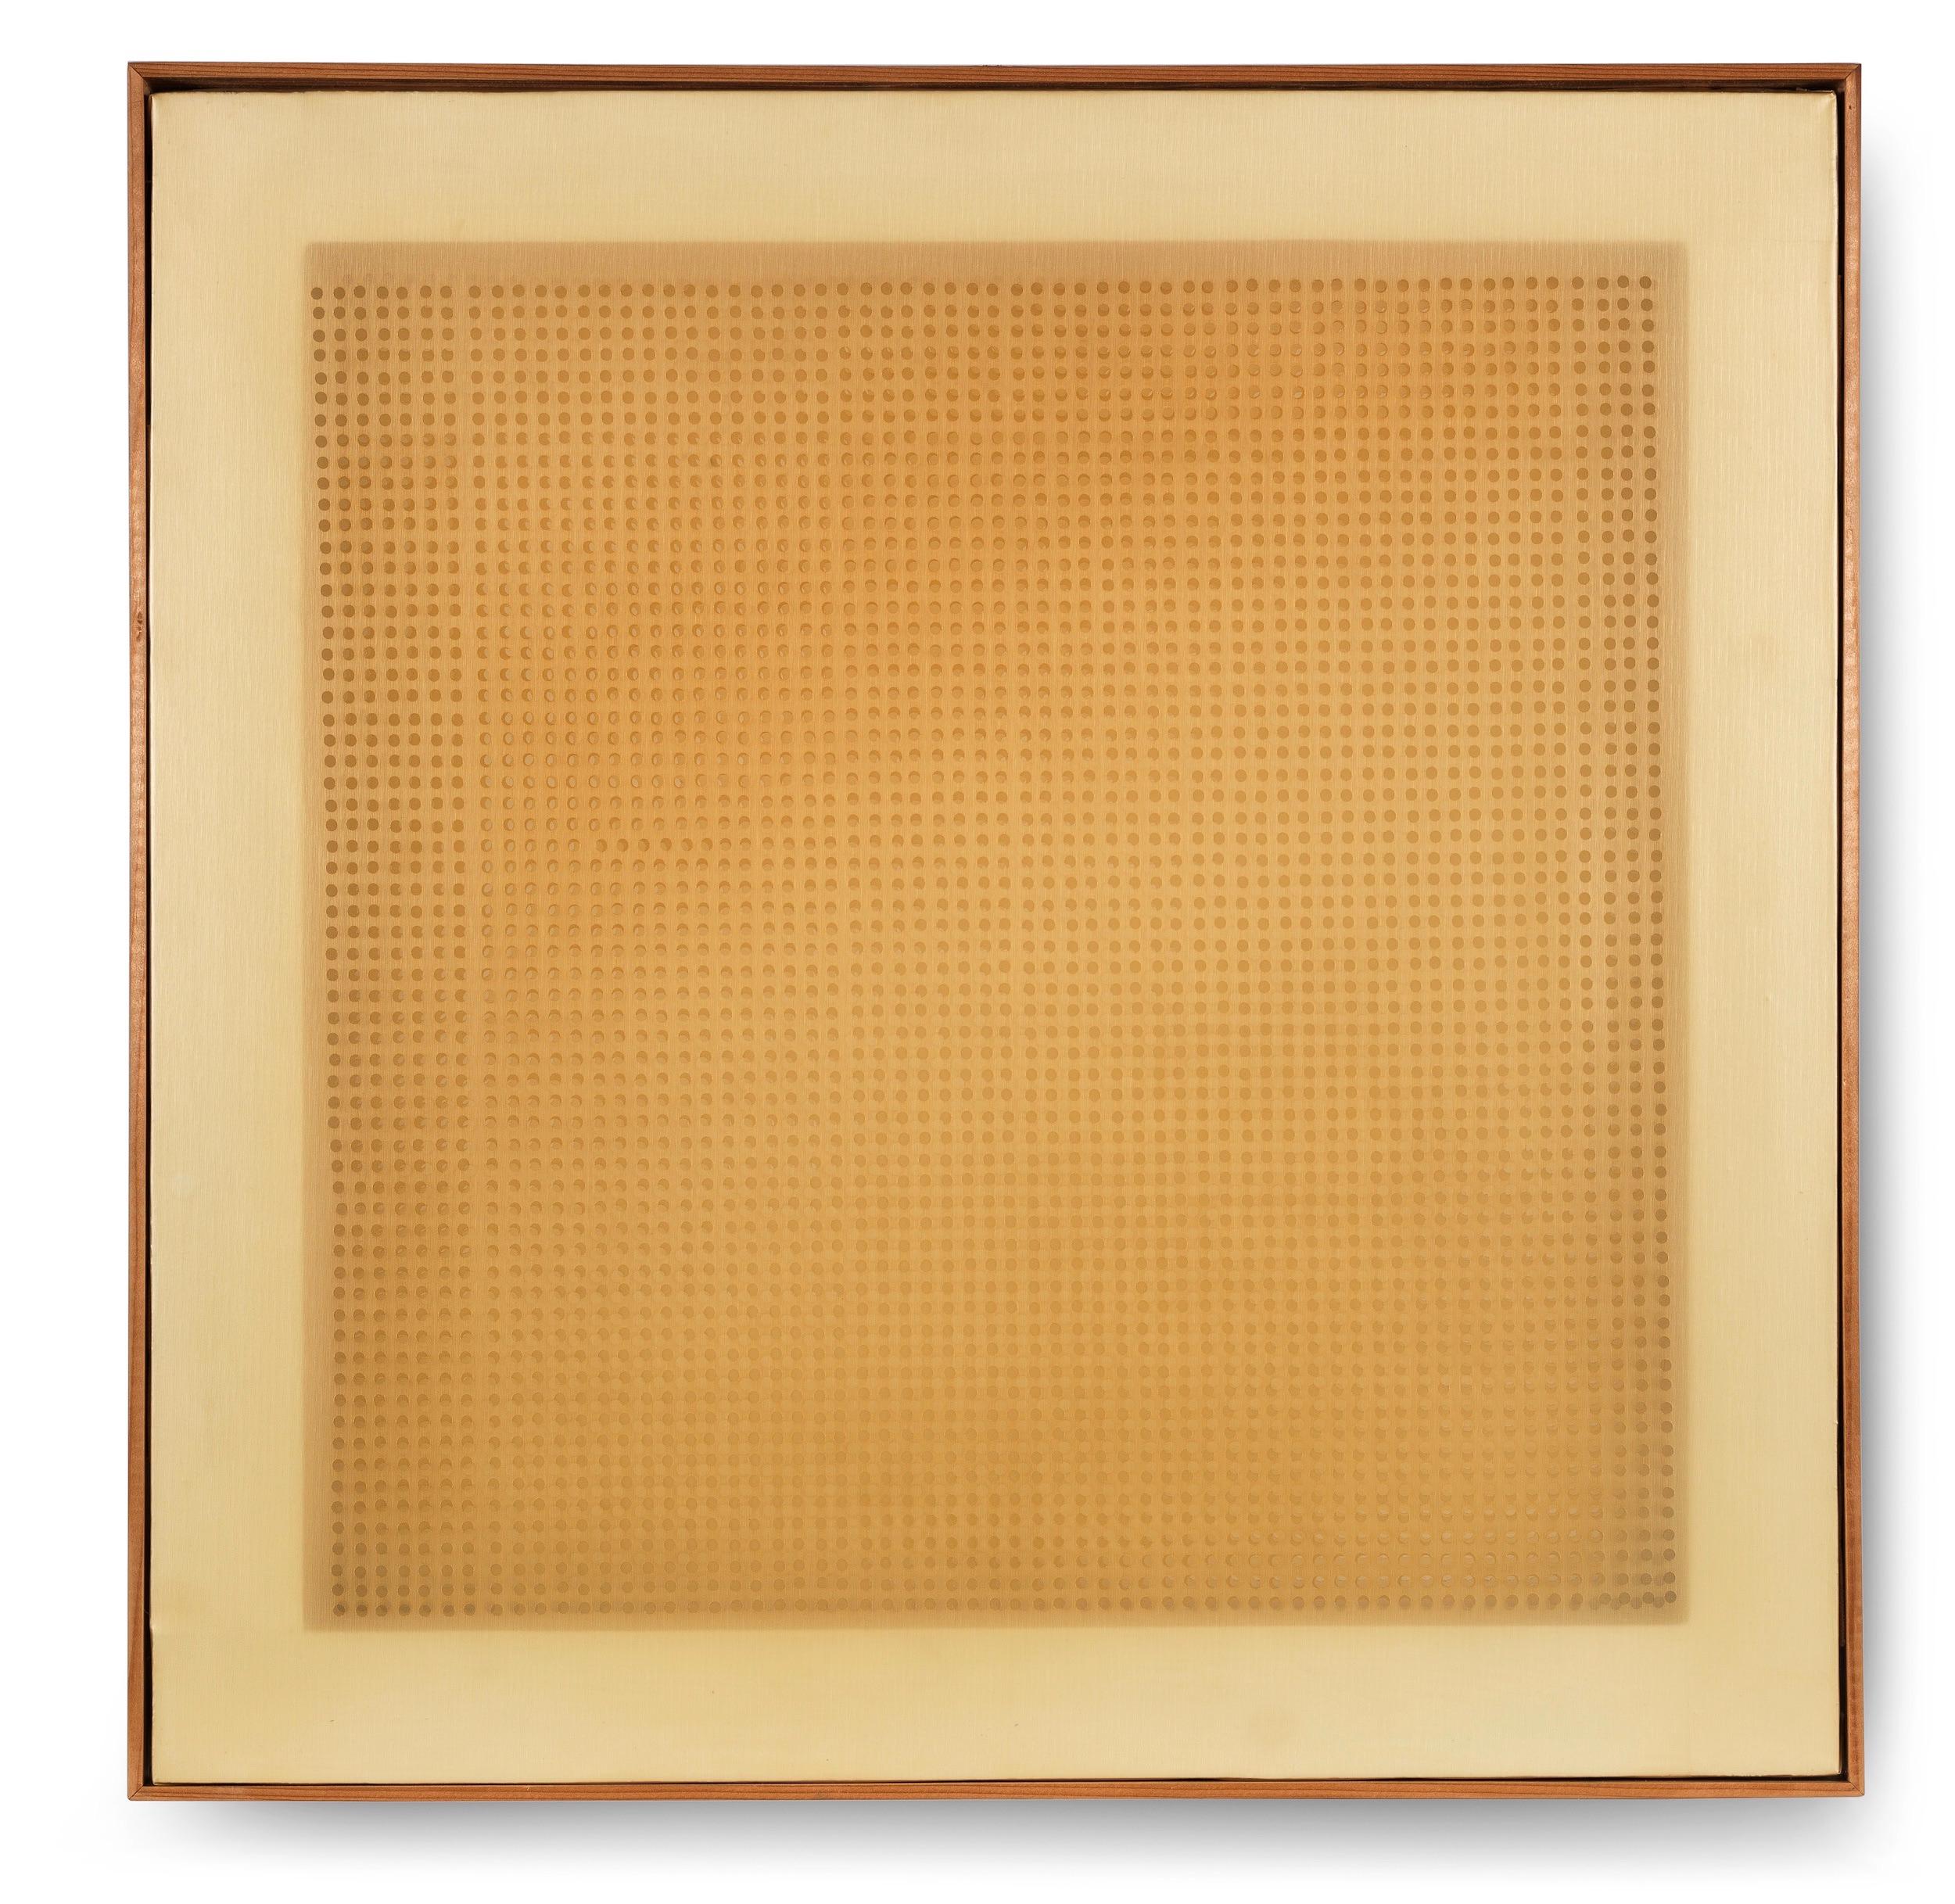 Volume A Moduli Sfasati, 1960, perforated and superimposed plastic canvases  - Brown Abstract Painting by Dadamaino